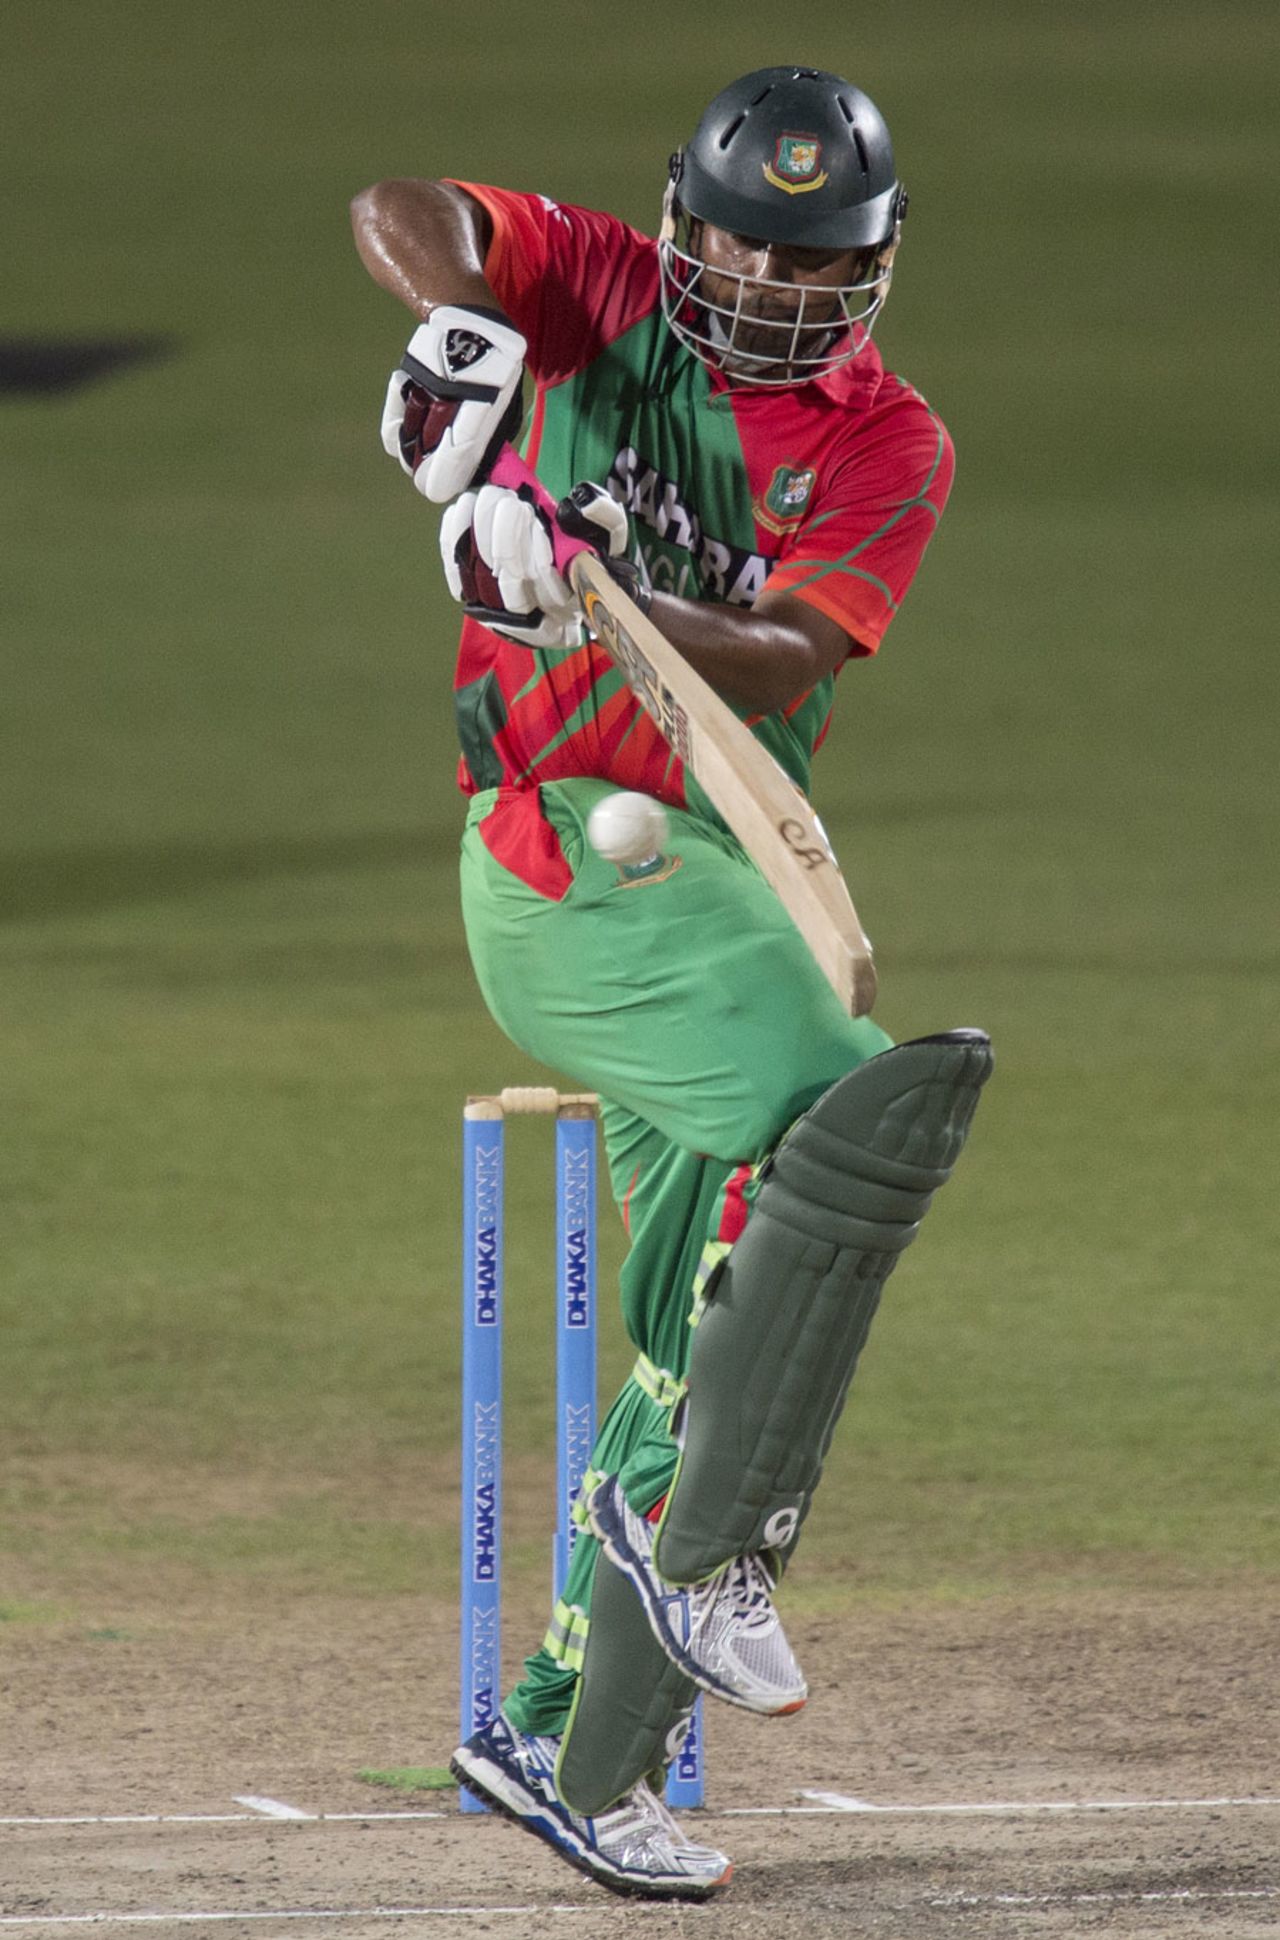 Tamim Iqbal made his first fifty in 18 international innings, West Indies v Bangladesh, 3rd ODI, Basseterre, St Kitts, August 25, 2014